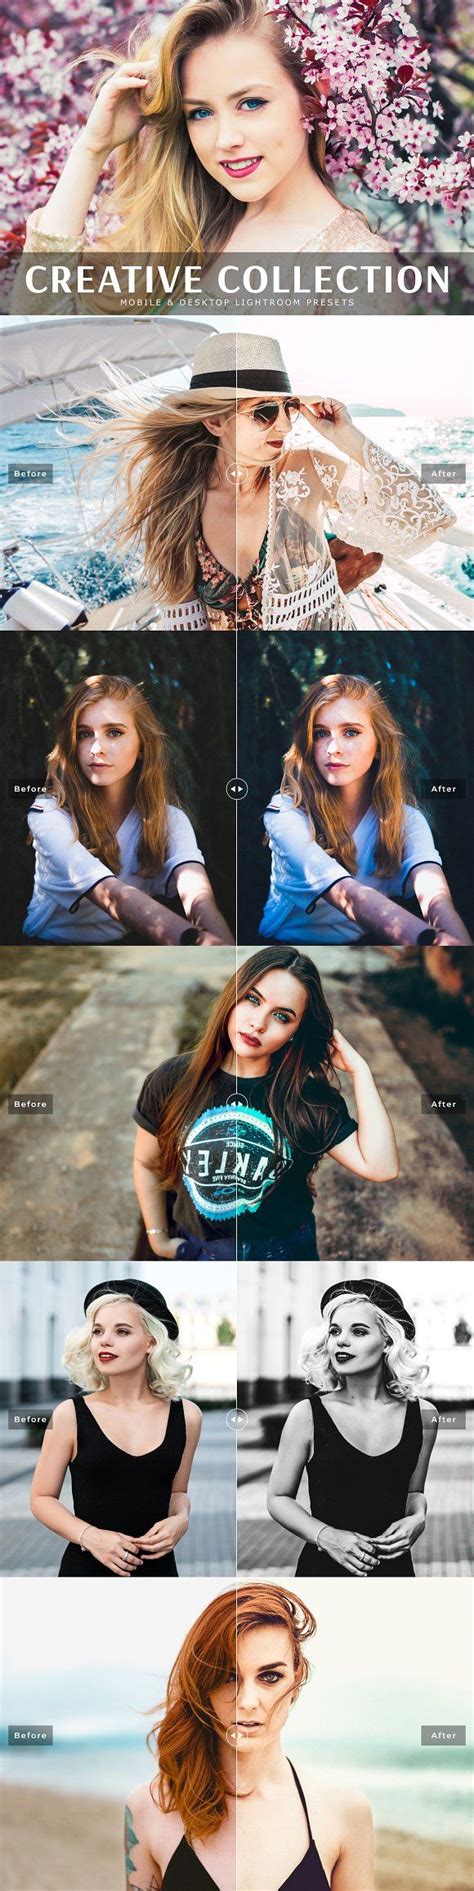 Lightroom presets are a great way to speed up photo editing. Creative Collection Lightroom Preset (With images ...